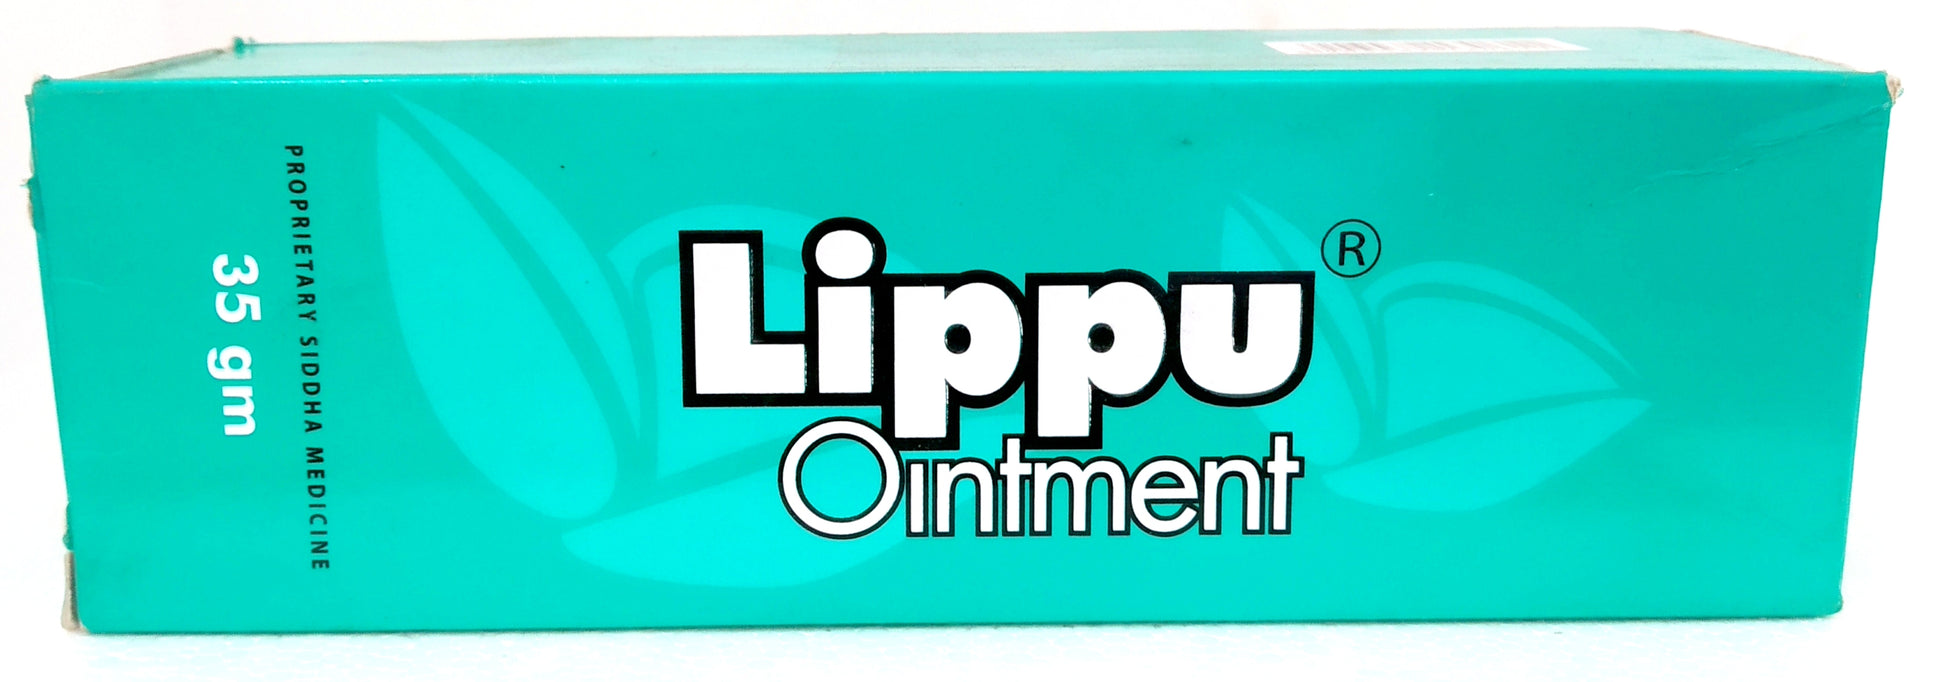 Shop Lippu Ointment 35gm at price 140.00 from Dr.JRK Online - Ayush Care